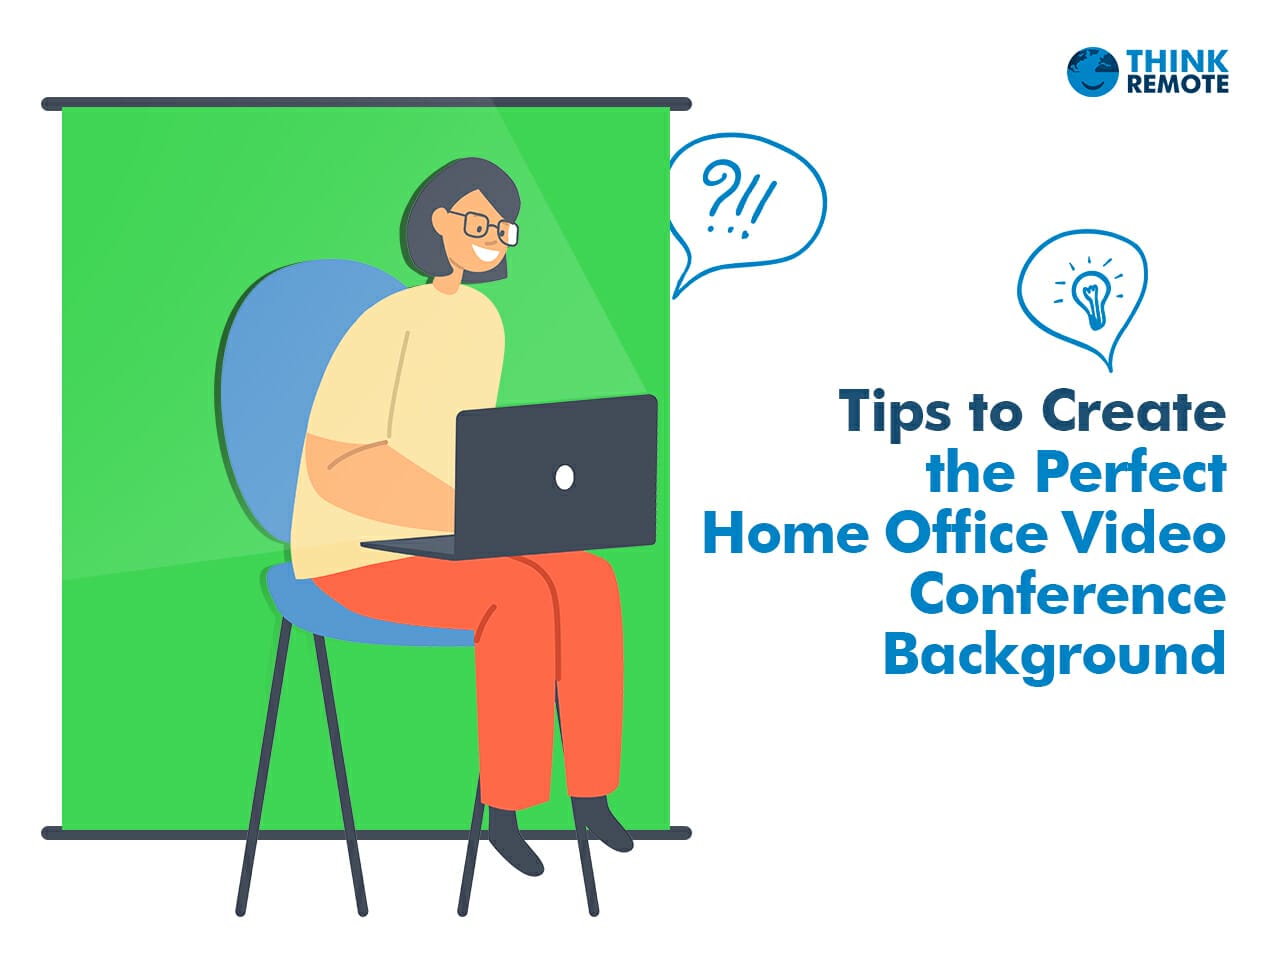 3 Tips for Creating a Professional Video Conference Background